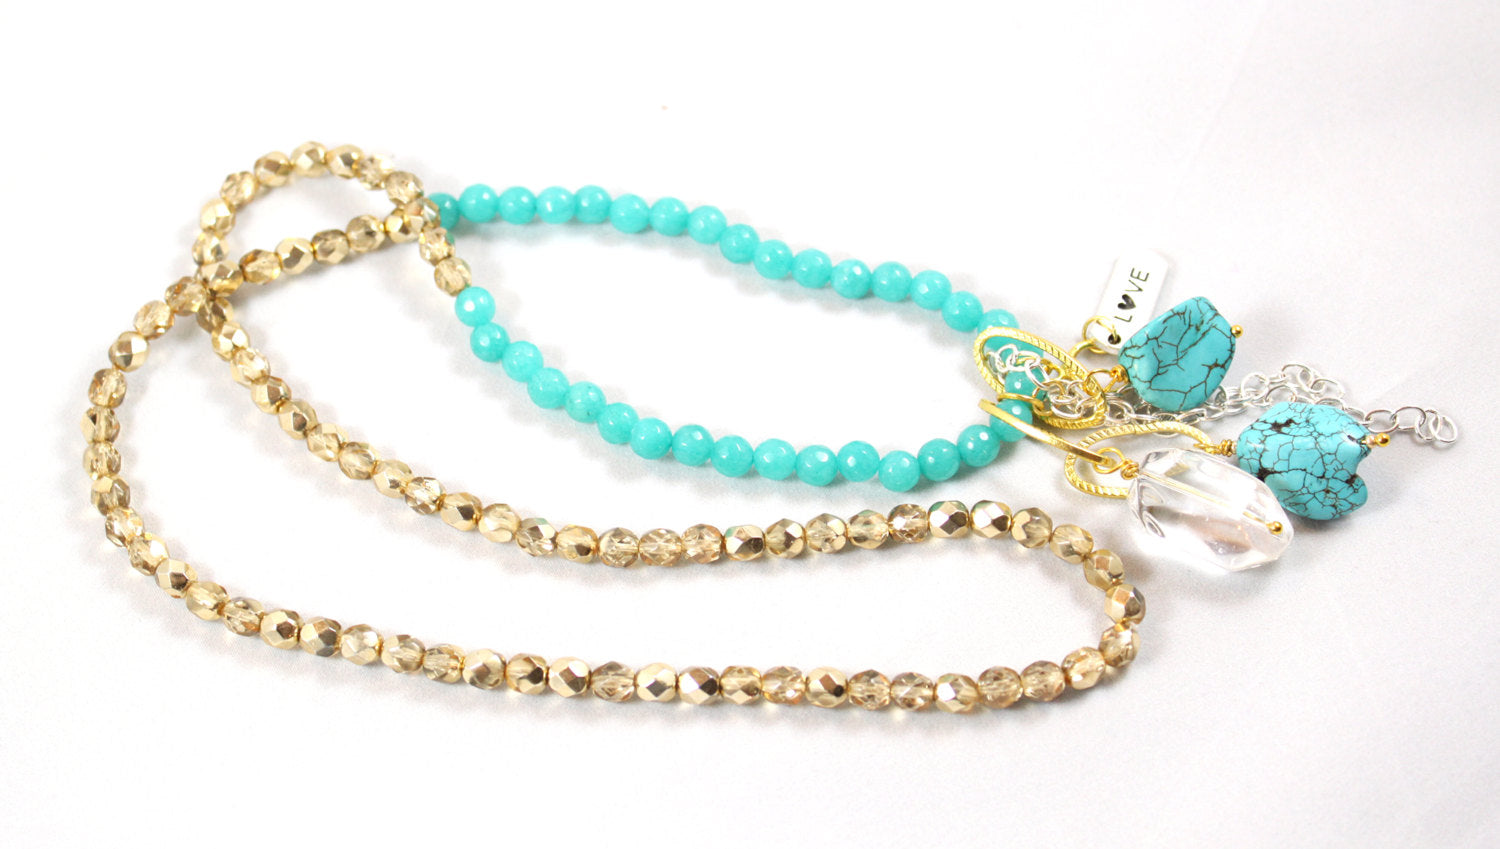 30-32" Long Faceted Aqua Agate and Golden Beaded Love Necklace with Clear Crystal, Love, Turquoise and Metal Findings Dangle Necklace